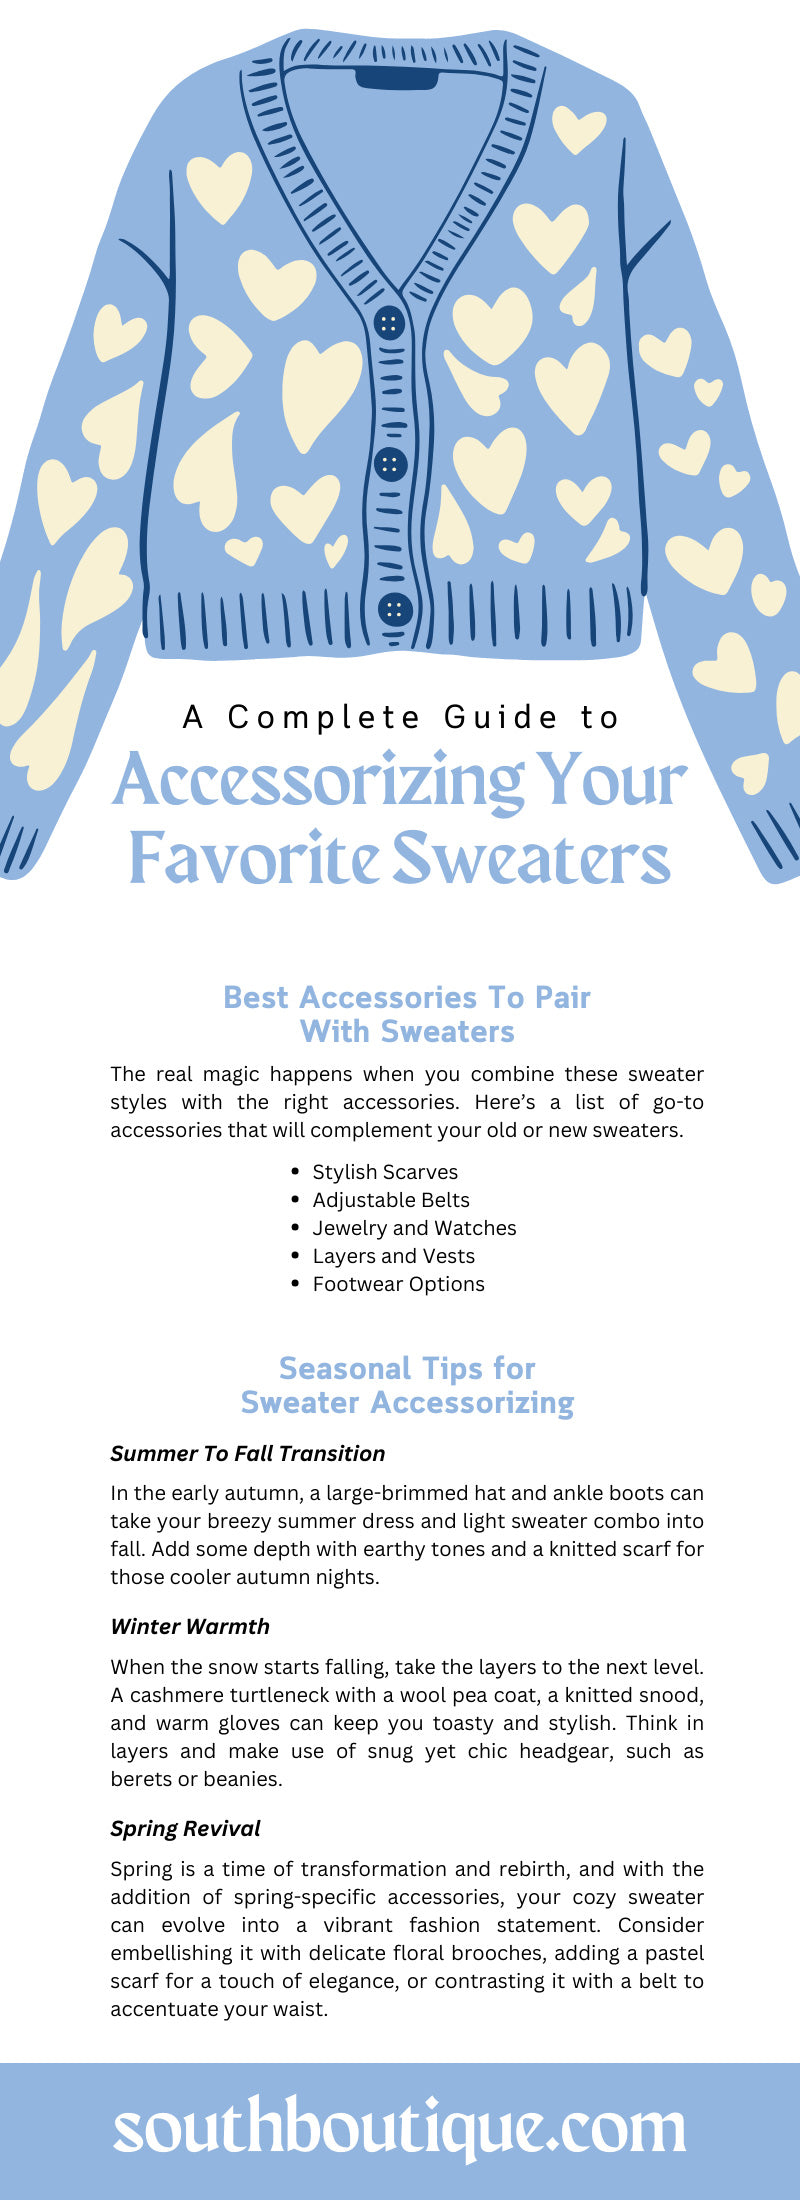 A Complete Guide to Accessorizing Your Favorite Sweaters